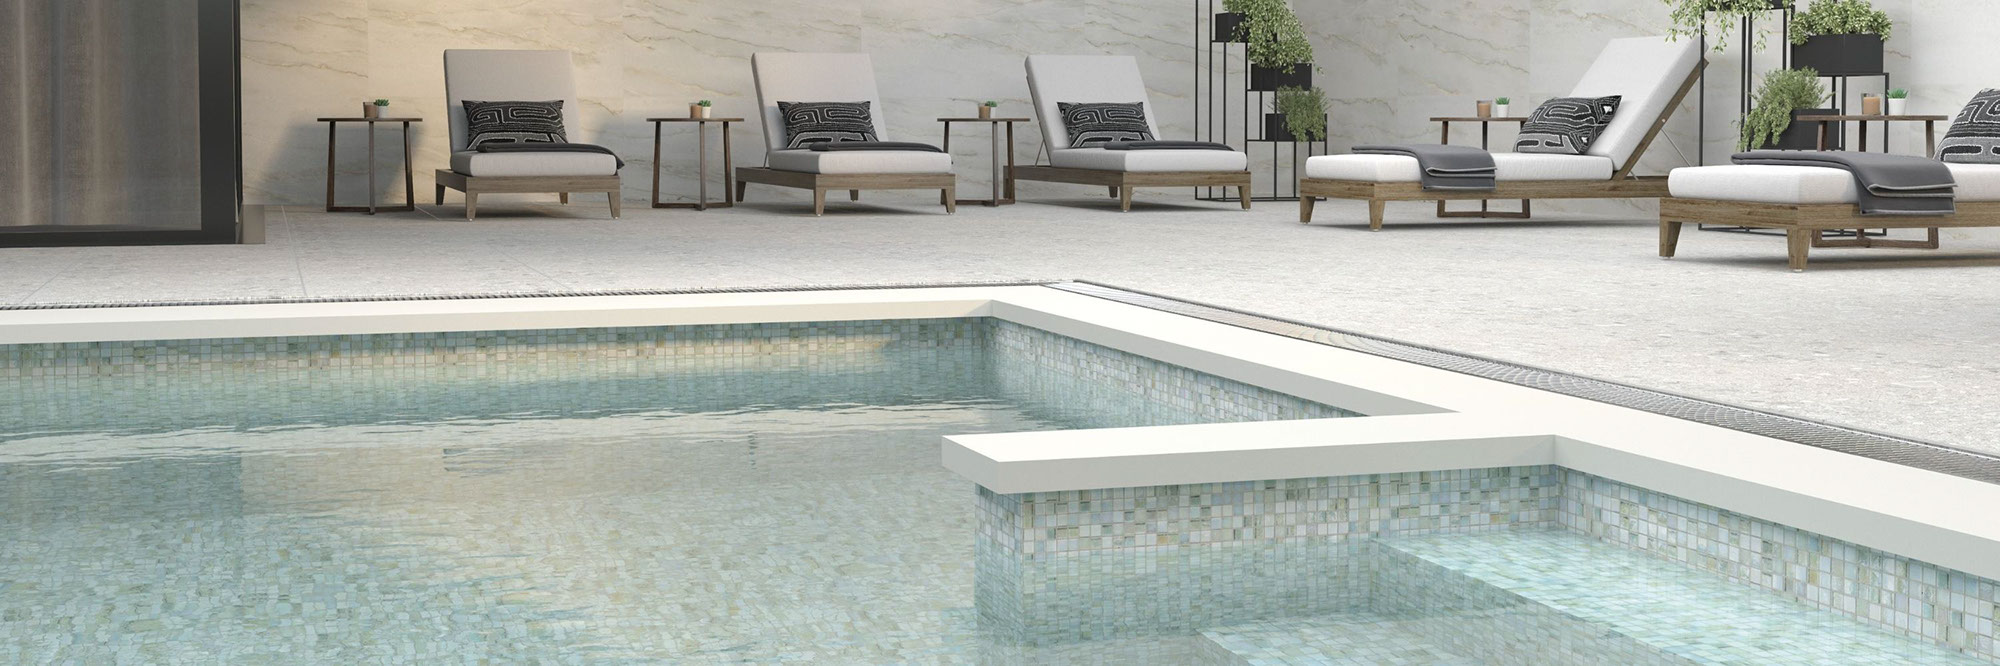 Outdoor pool with silver & gray mosaic pool tile, deck with white 2CM pavers, natural quartzite slab walls, and wooden lounge chairs with white cushions.